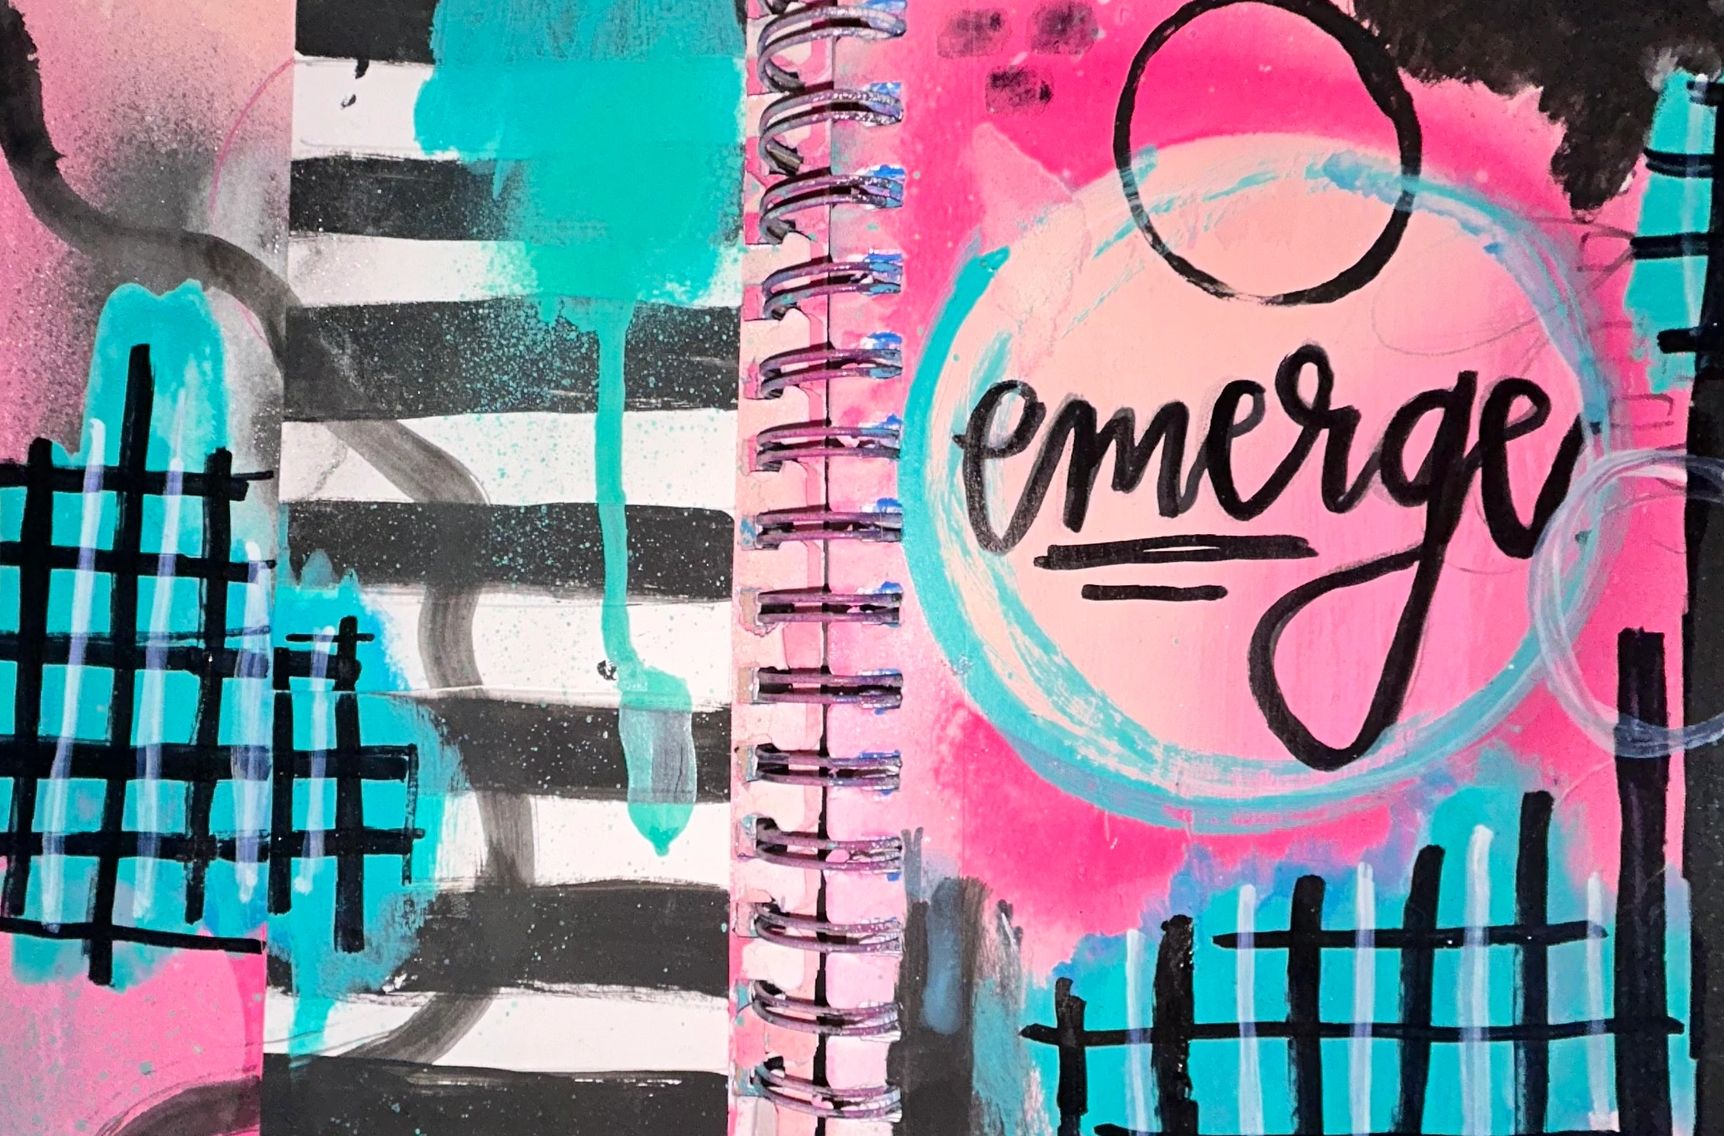 This Art Journal Page is quite simple. Made with Acrylic Paint, paper design scraps, and spray paint